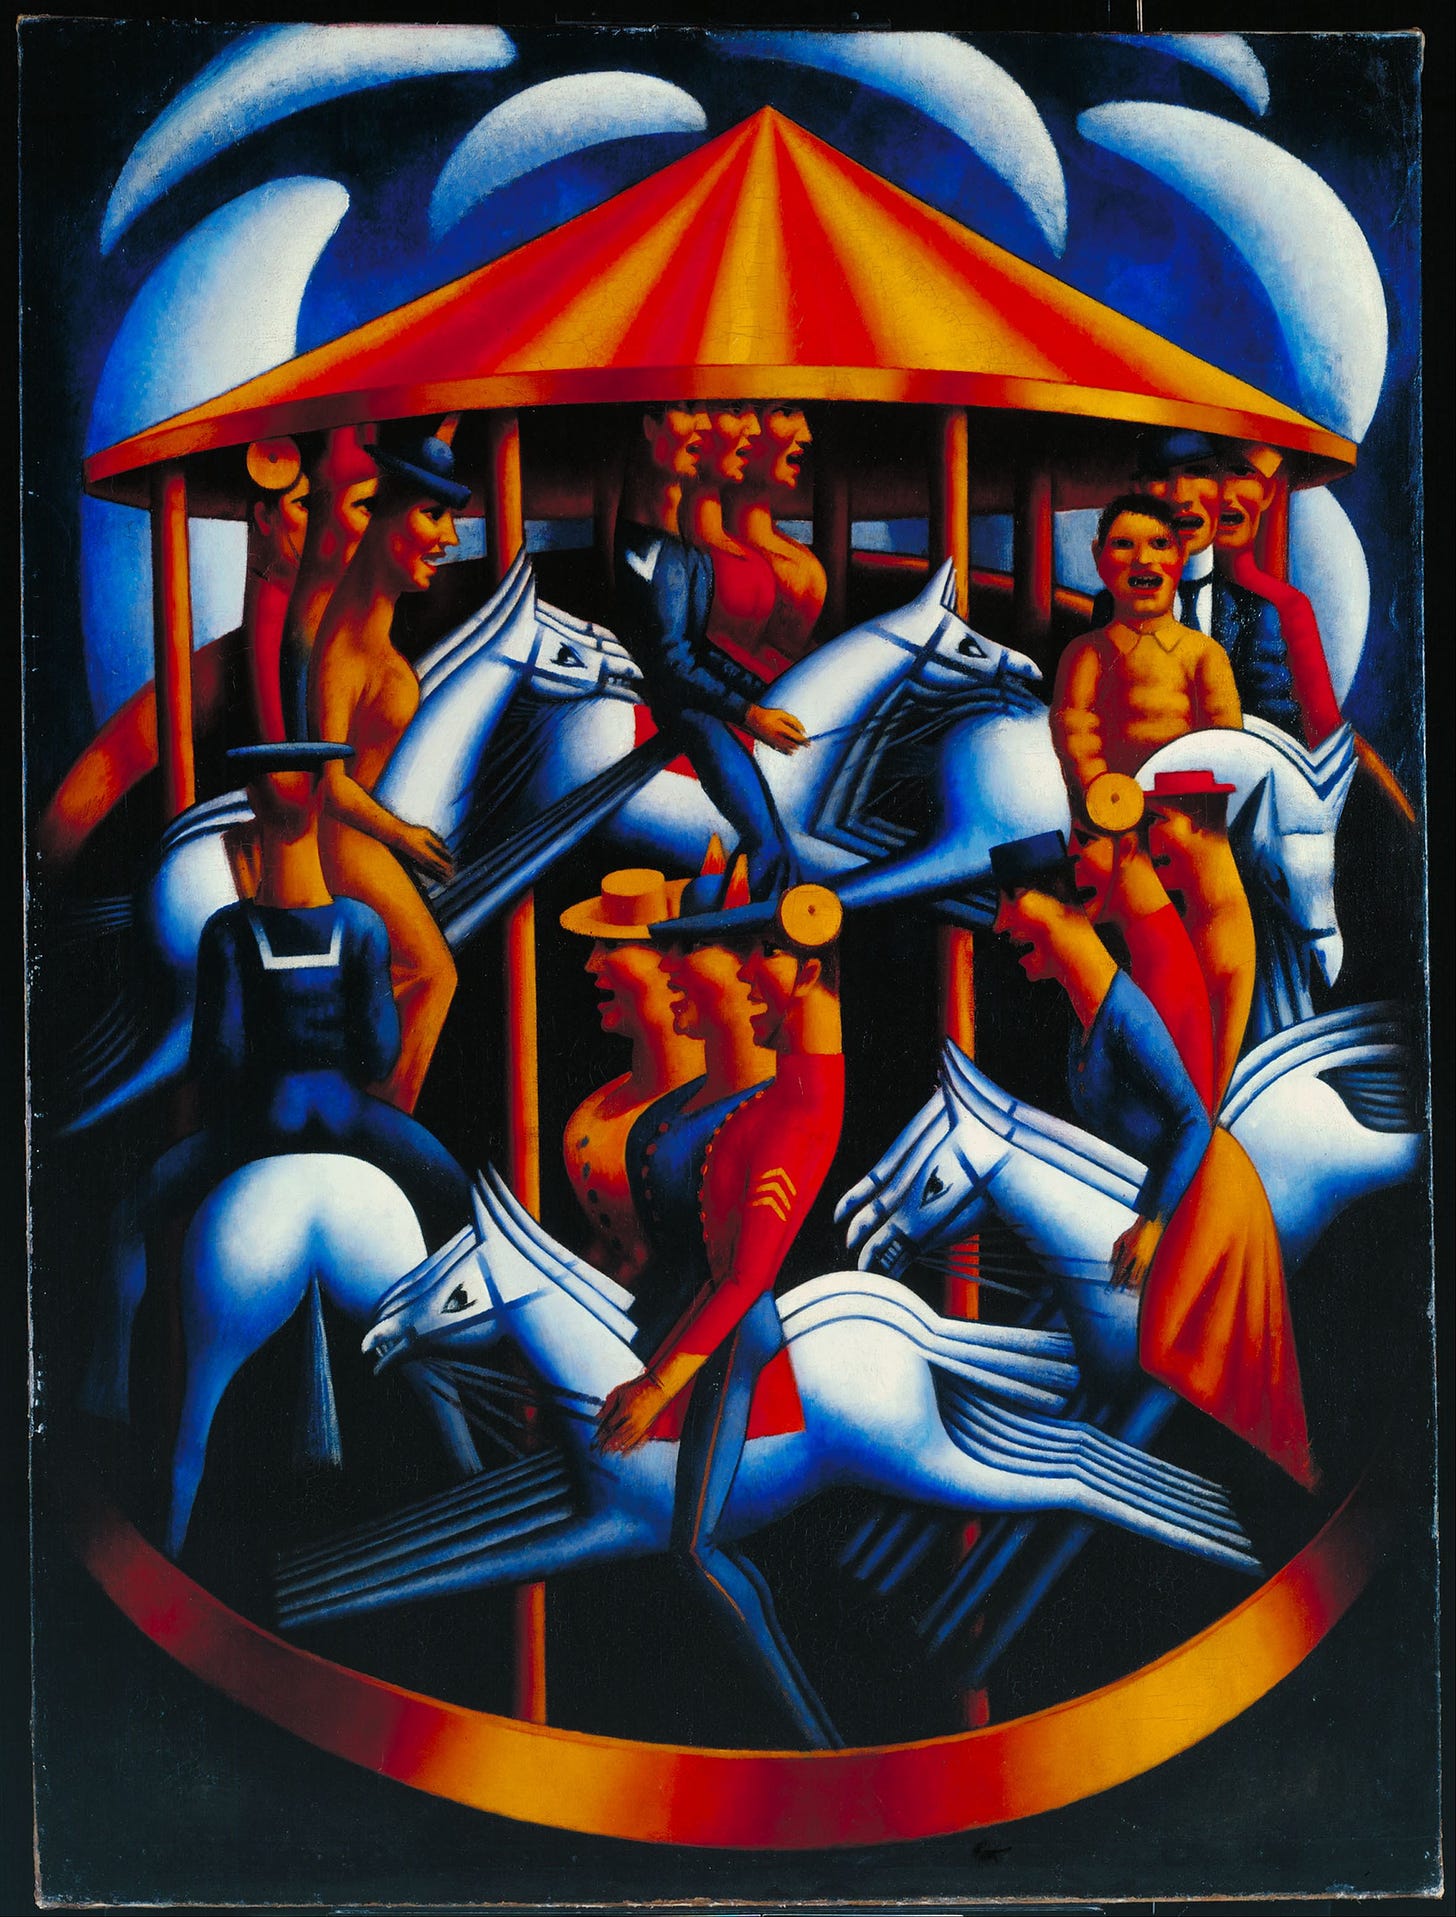 Merry-Go-Round (Gertler painting) - Wikipedia